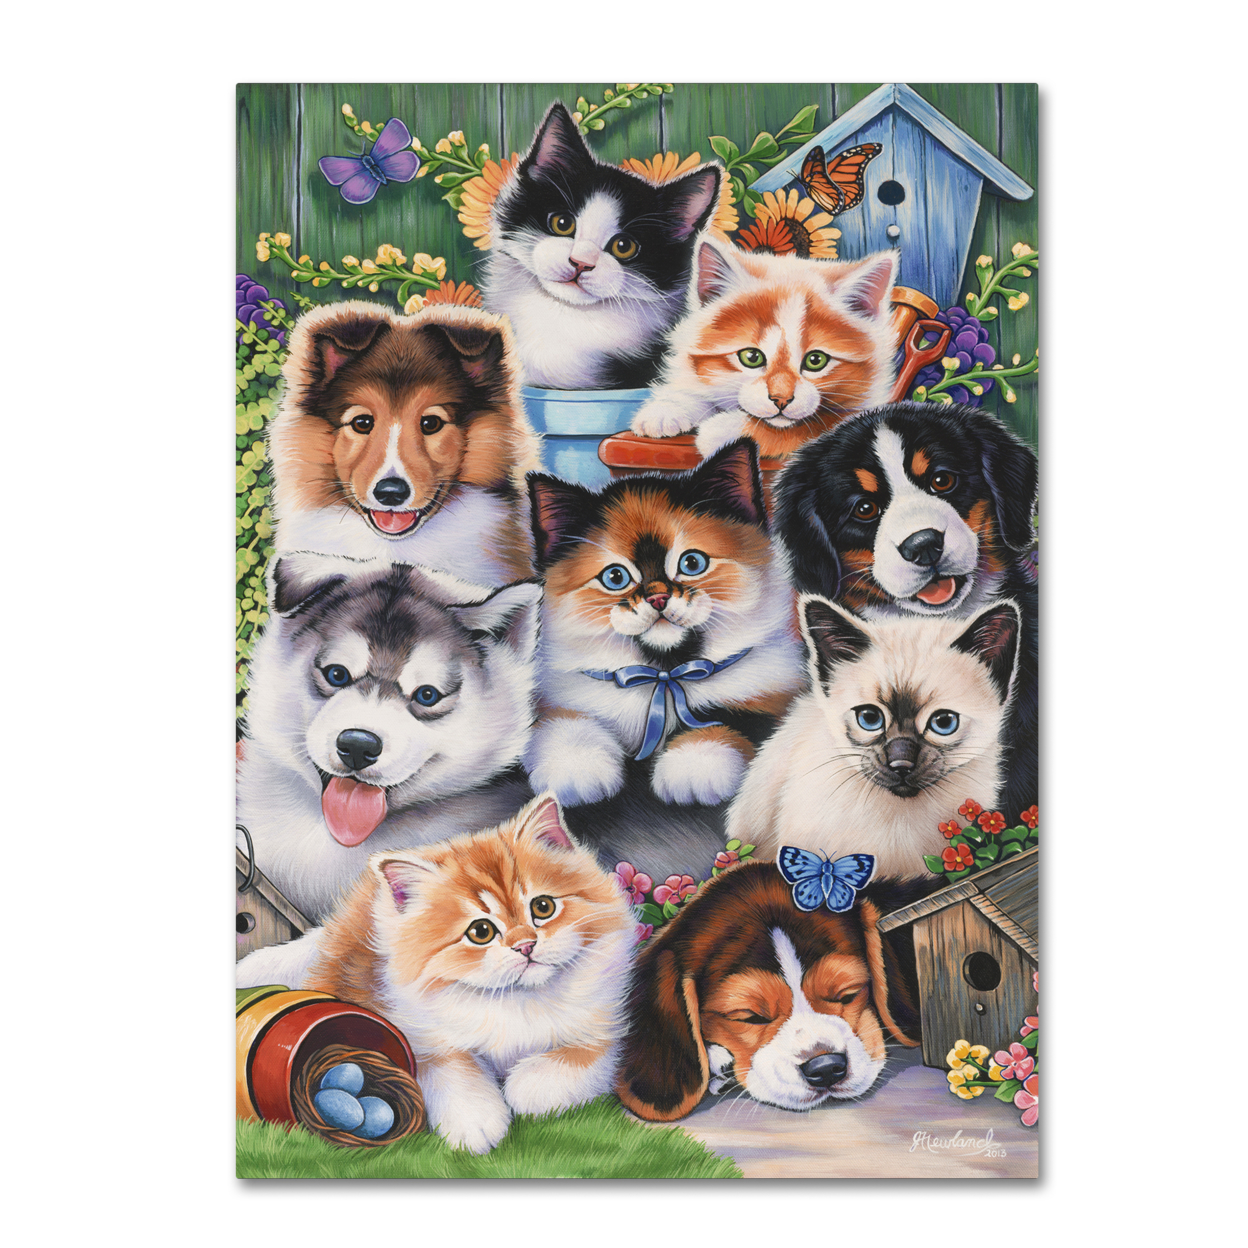 Jenny Newland 'Kittens & Puppies In The Garden' Canvas Wall Art 35 X 47 Inches